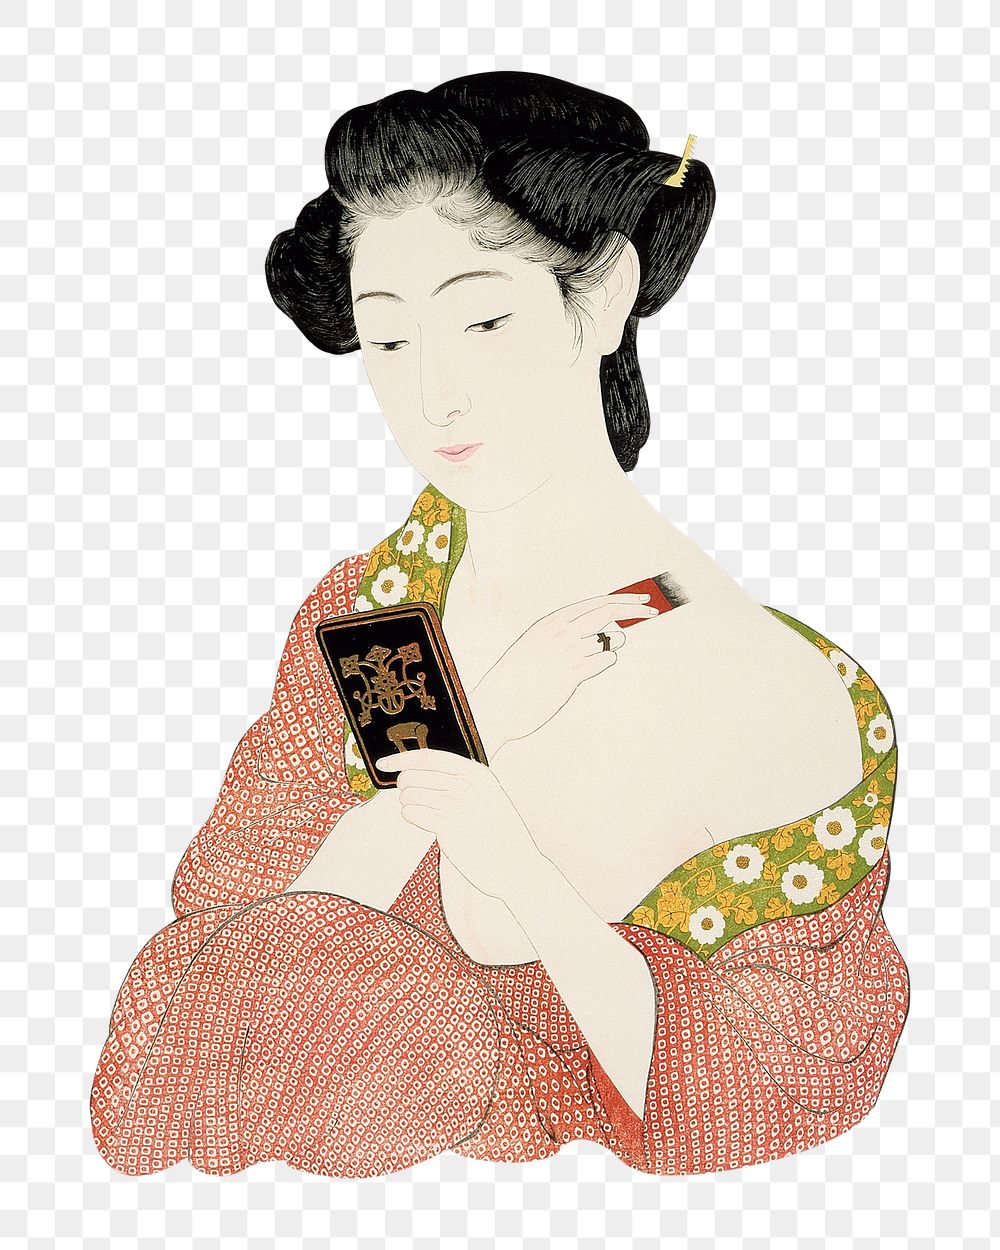 PNG Woman at Toilette (1918), vintage Japanese illustration by Hashiguchi Goyo, transparent background. Remixed by rawpixel.